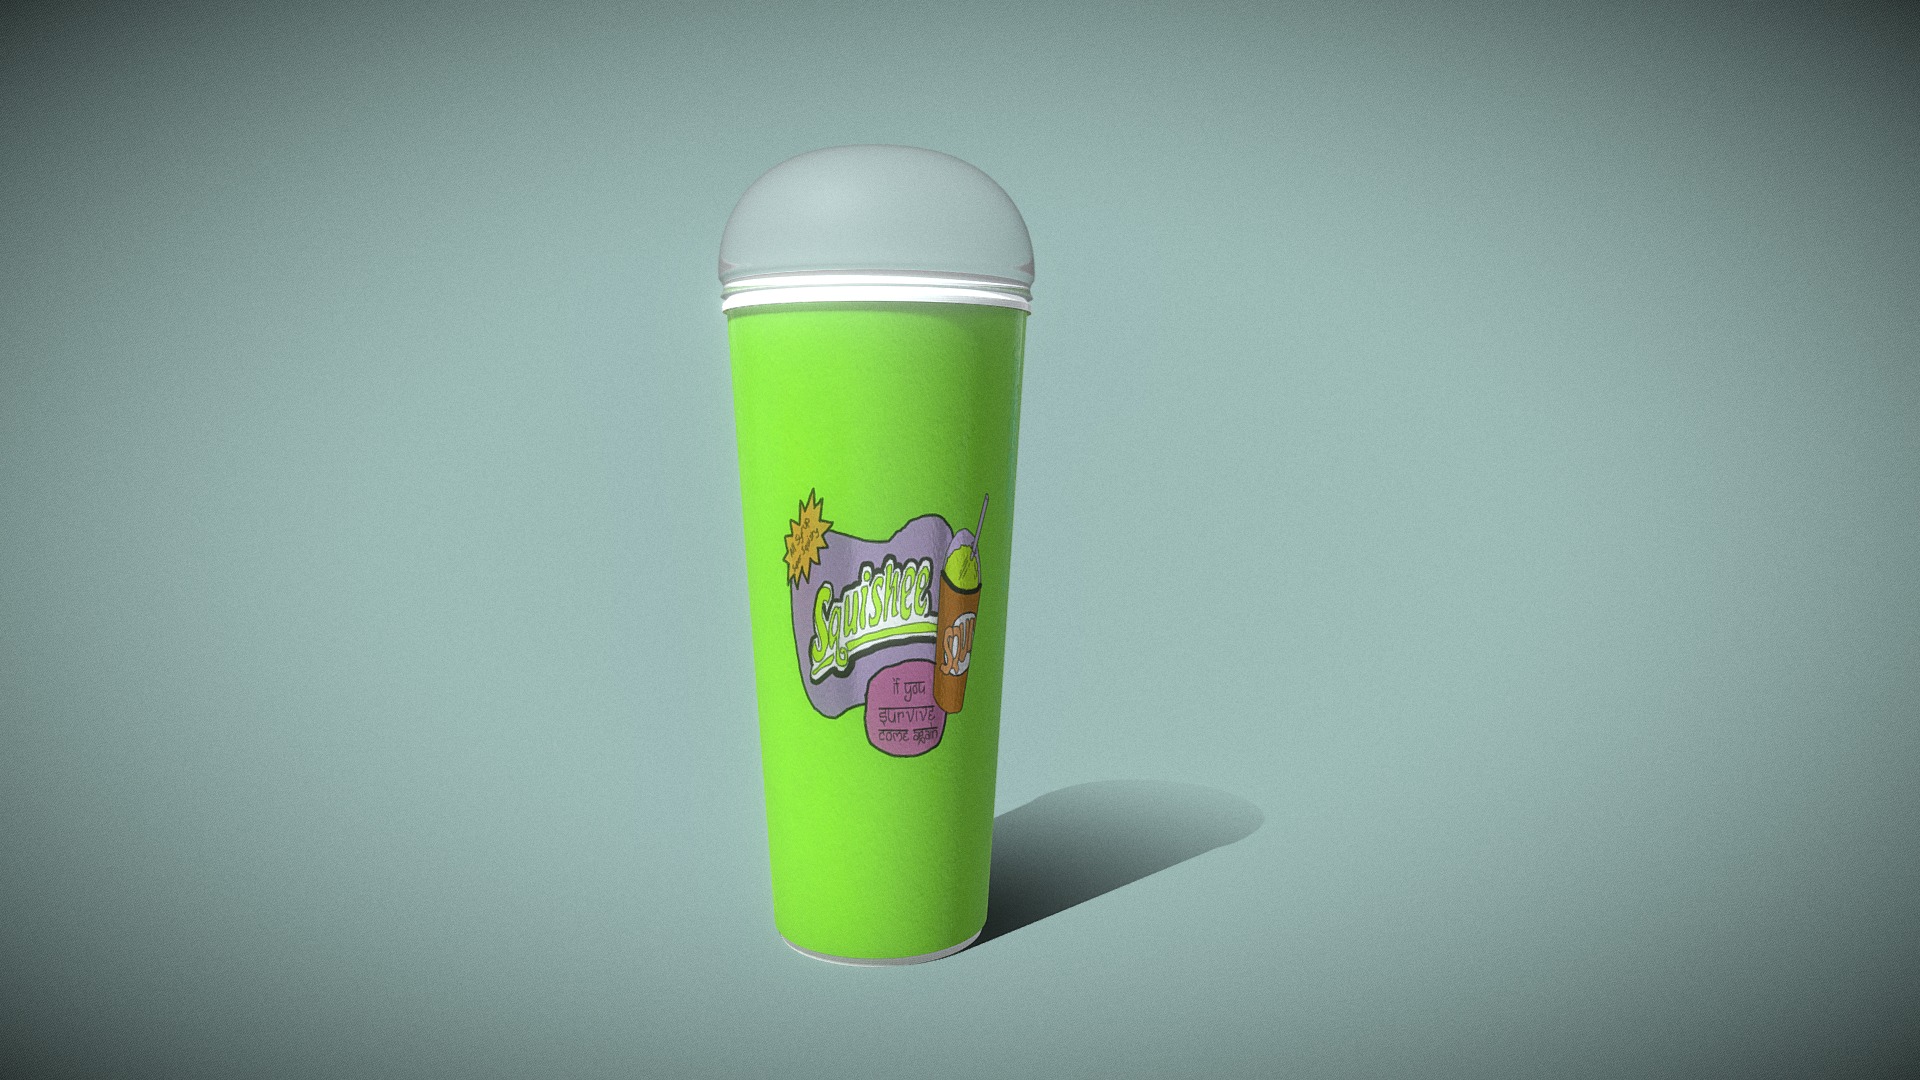 3D model Squishie – The Simpsons - This is a 3D model of the Squishie - The Simpsons. The 3D model is about a green and yellow cylindrical object.